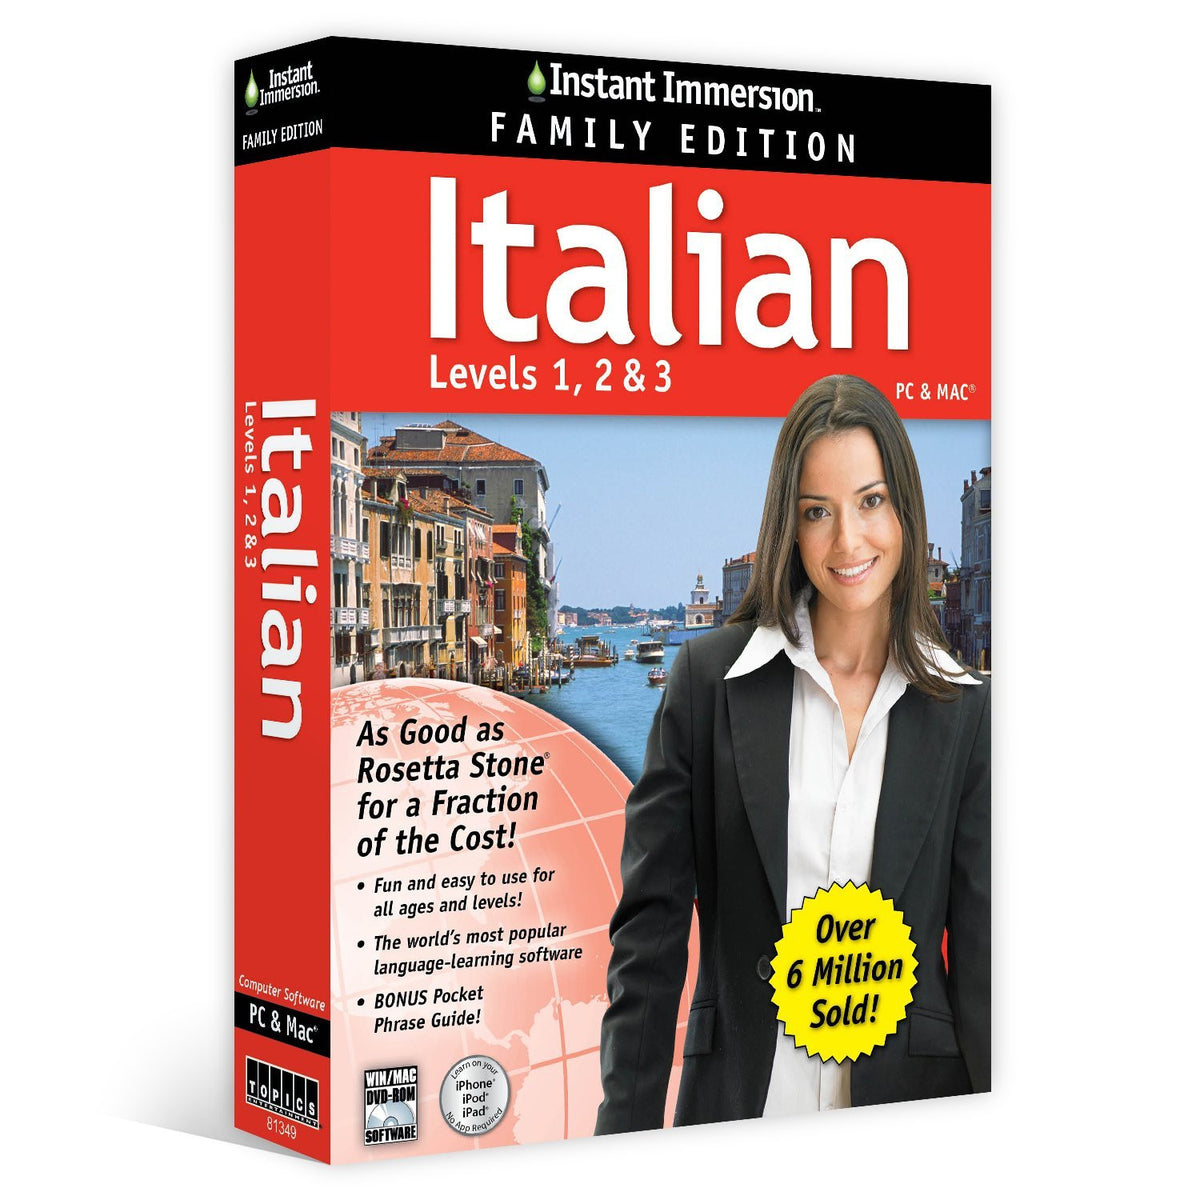 Instant Immersion Italian Family Edition Levels 1,2,3 (CD-ROM) PC & MAC